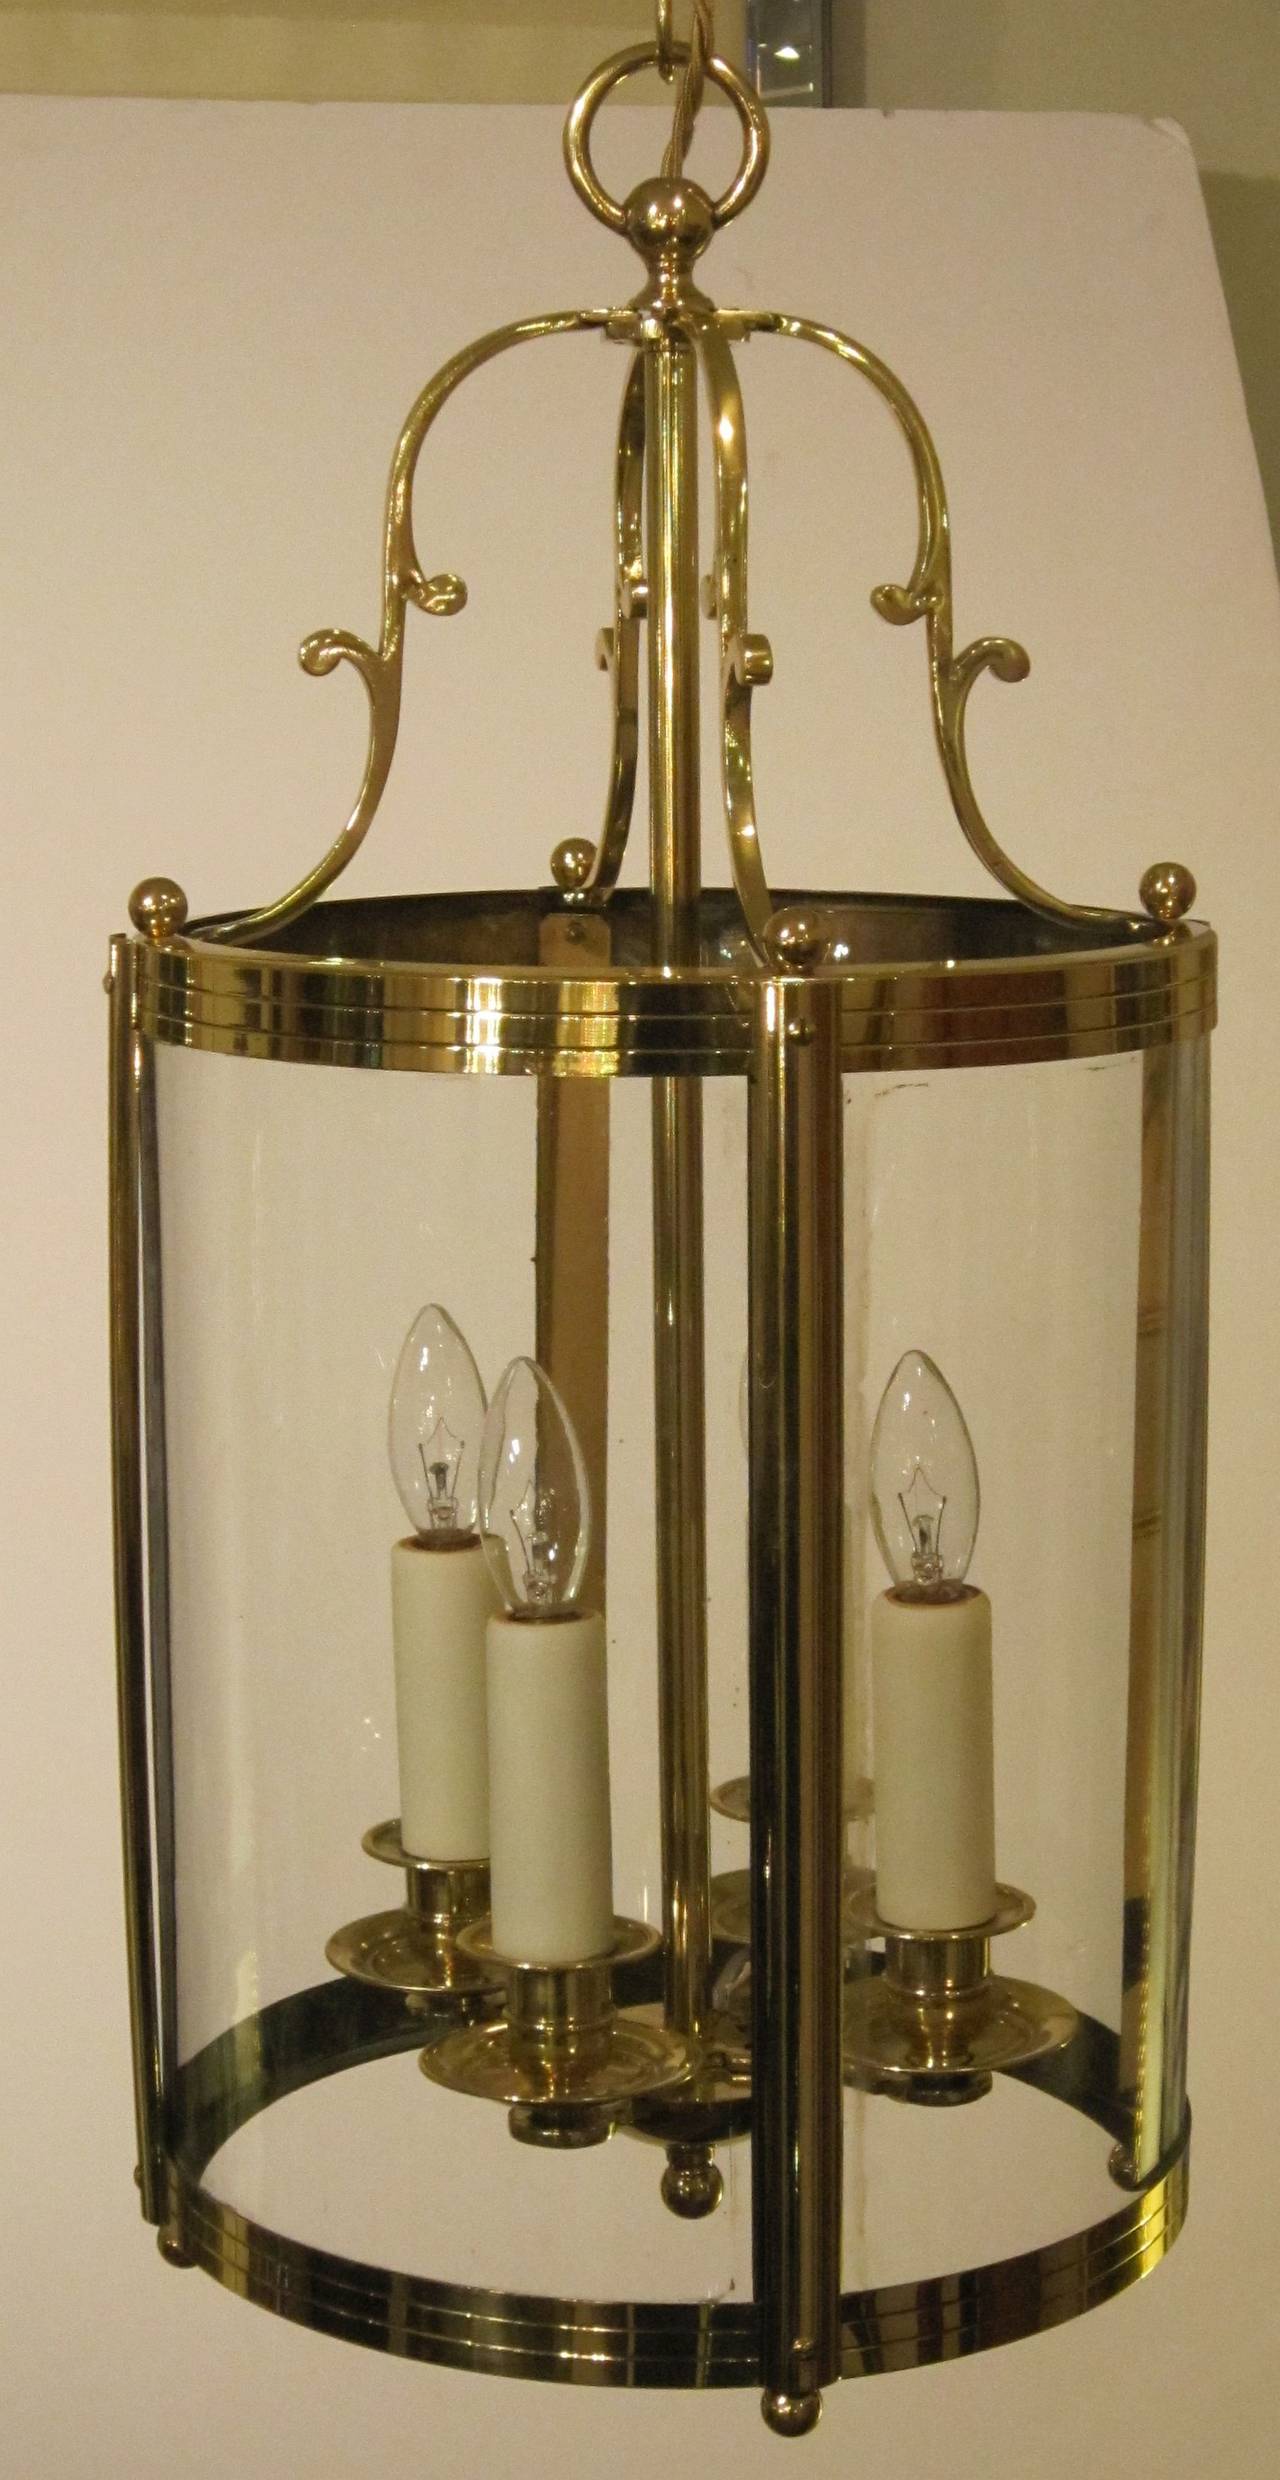 A handsome French four-light hanging fixture or lantern of brass and glass featuring a cylindrical body with scroll-work top and four candle lights with brass bobeches. Decorative spherical finials to top and base. 

10 1/4